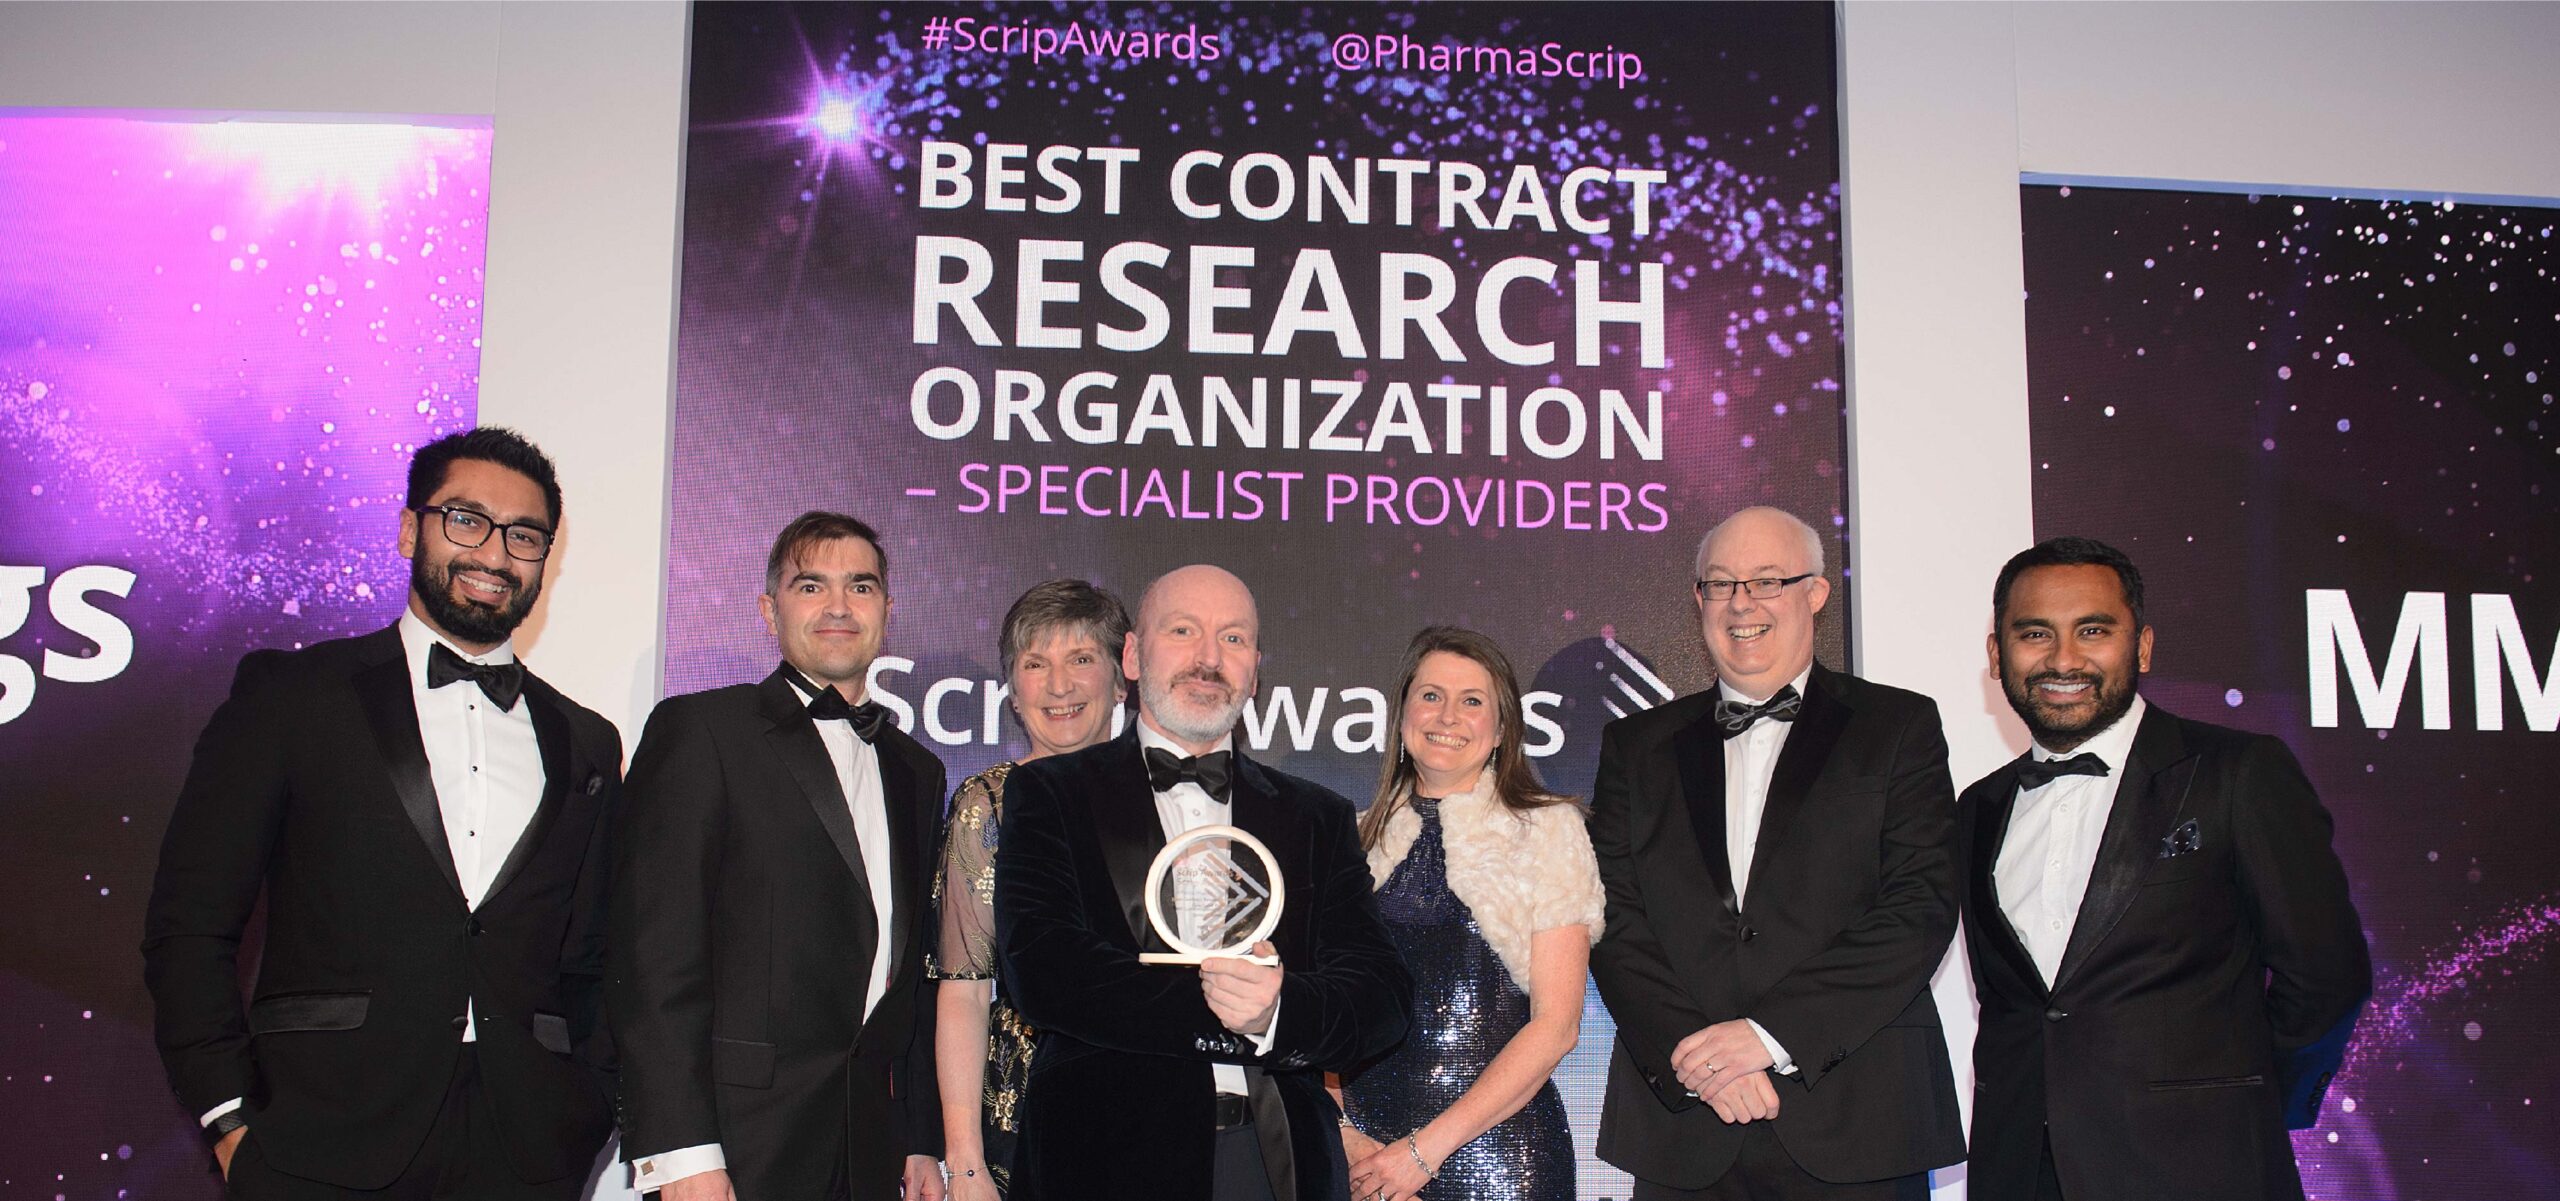 Best Contract Research Organization Scrip Awards